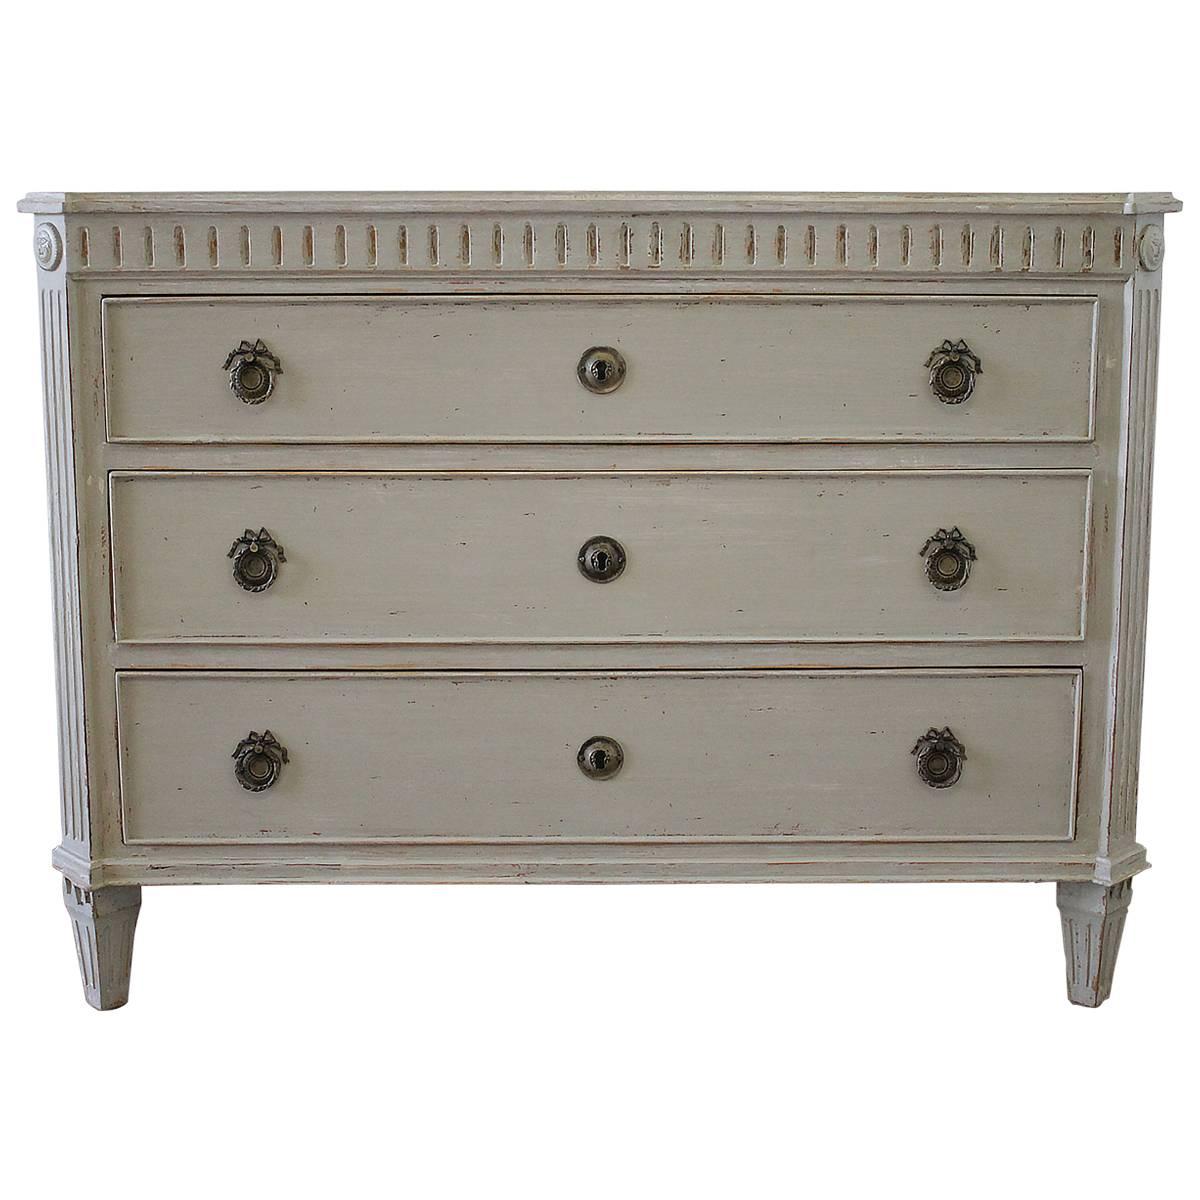 19th Century Swedish Painted Gustavian Style Chest of Drawers